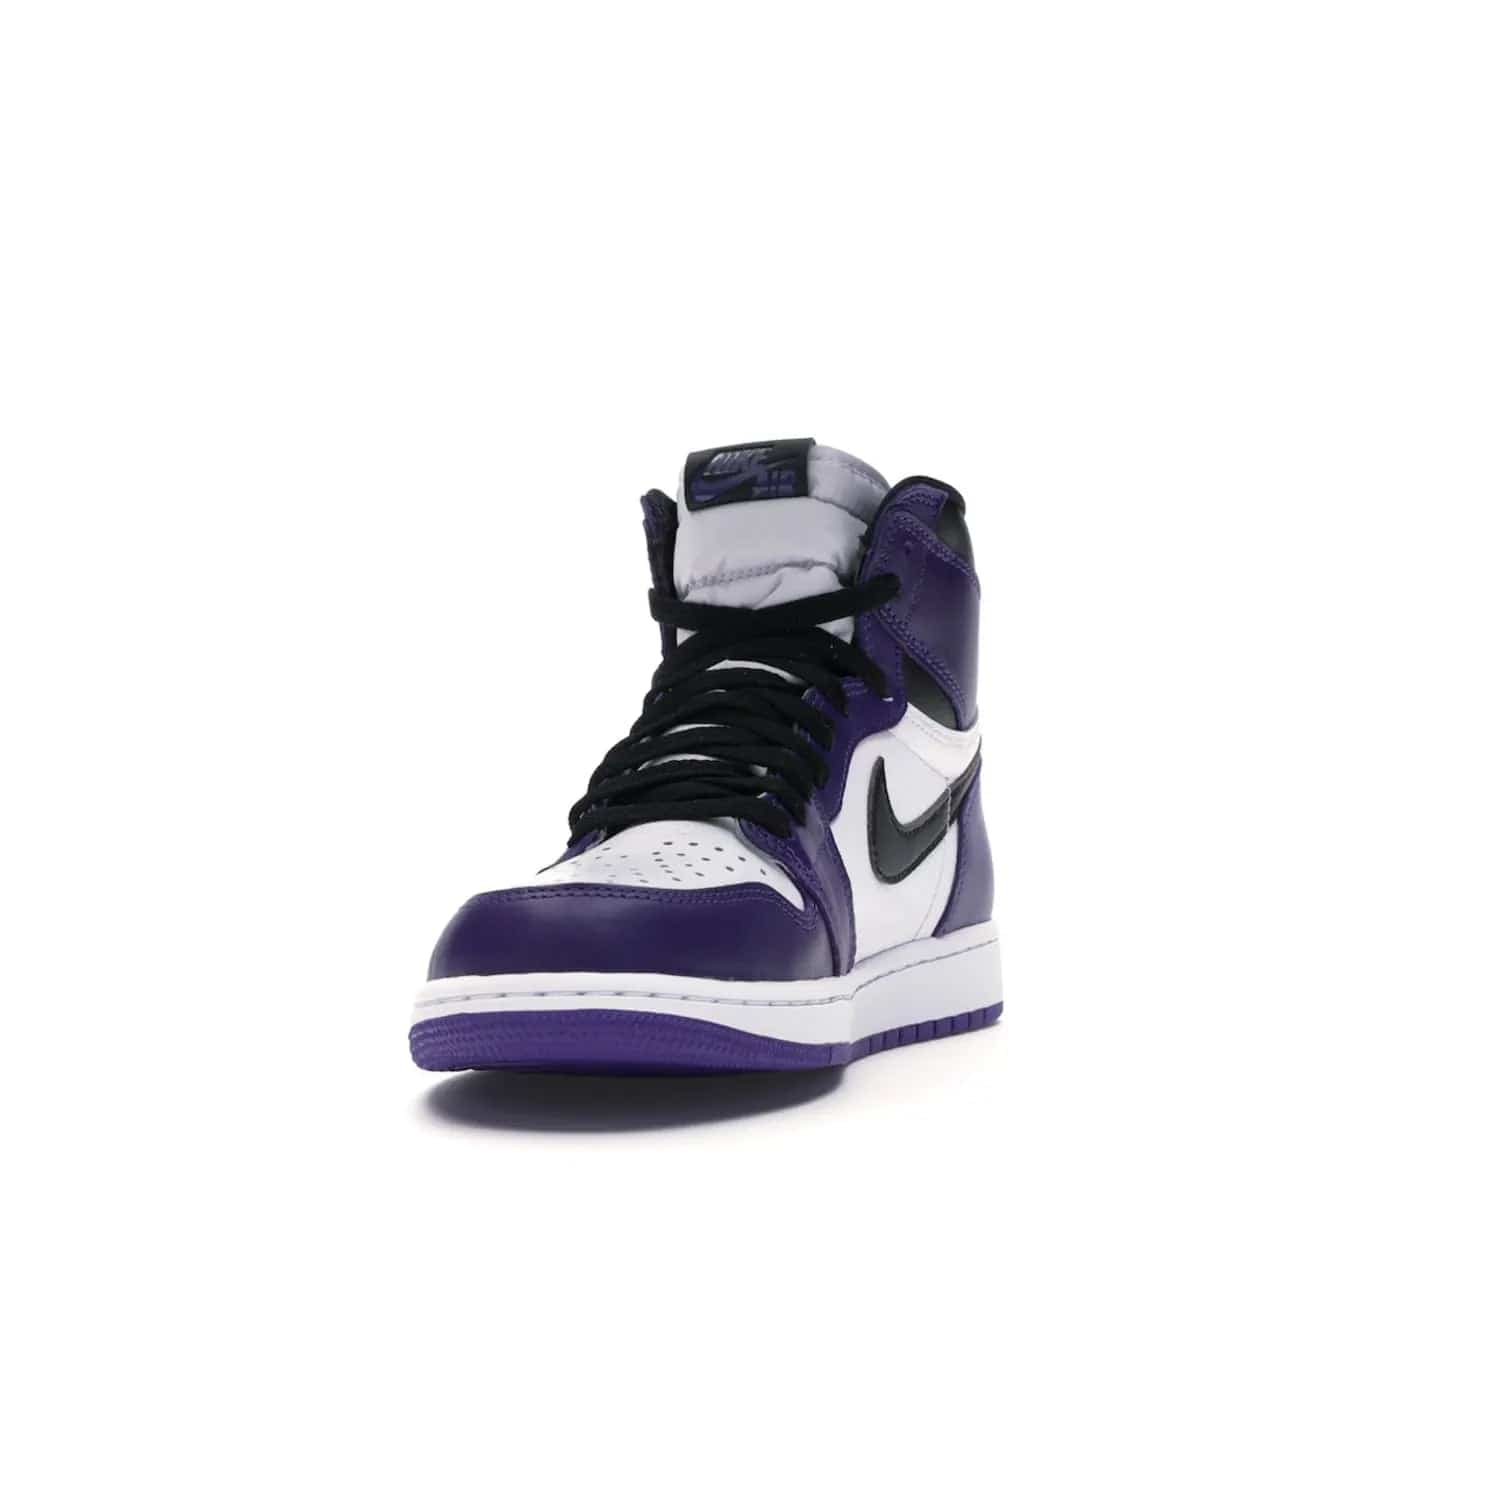 Jordan 1 Retro High Court Purple White - Image 12 - Only at www.BallersClubKickz.com - Grab the classic Jordan 1 Retro High Court Purple White and add major flavor to your collection. White leather upper with Court Purple overlays and Swoosh logo. White midsole and purple outsole. Get yours and rep your Jordan Brand.